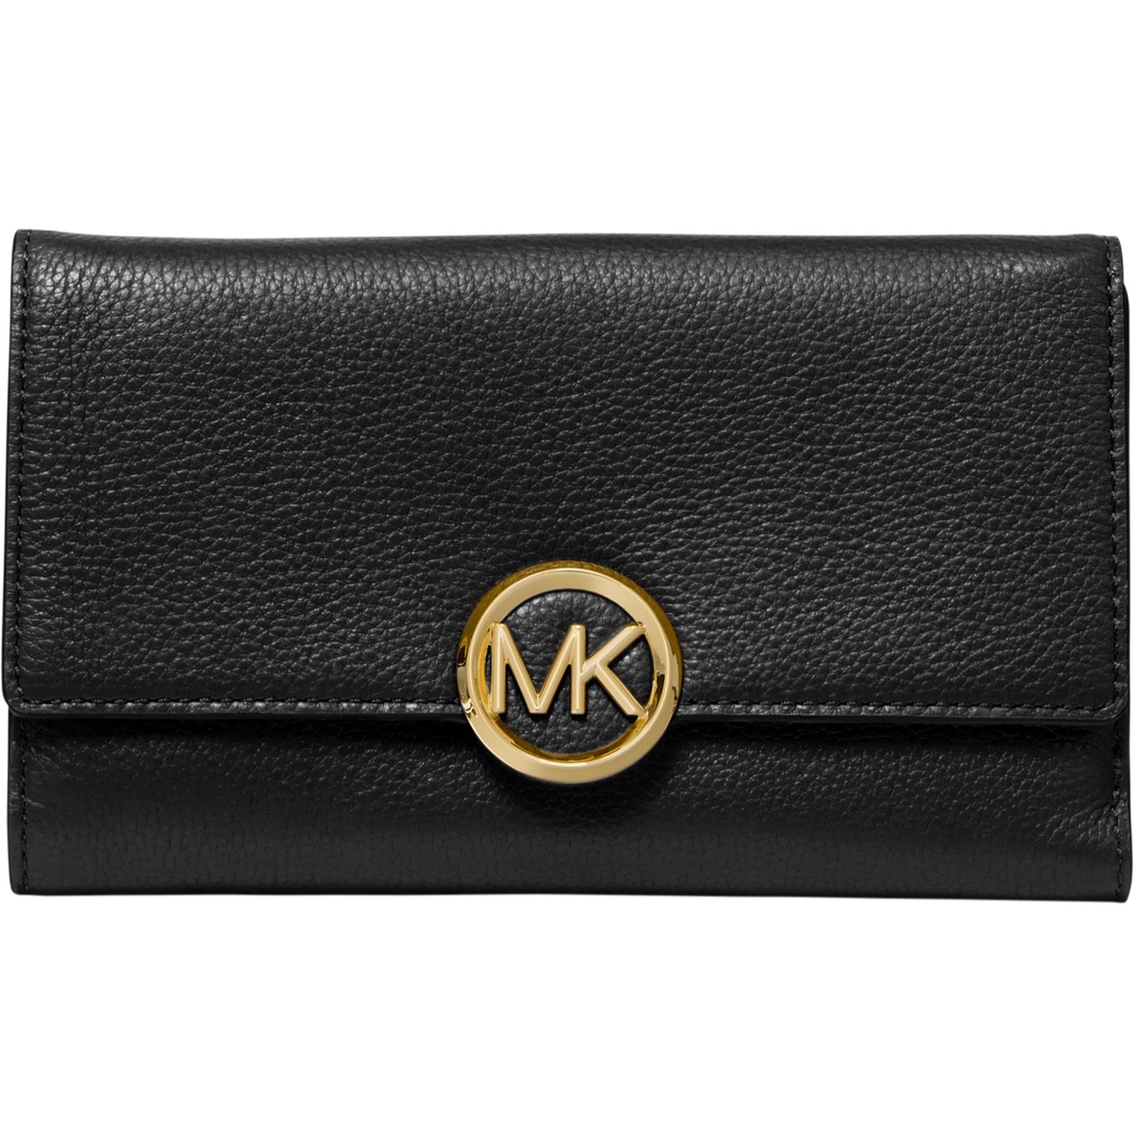 Michael Kors Lillie Large Leather Carryall | Wallets | Clothing ...